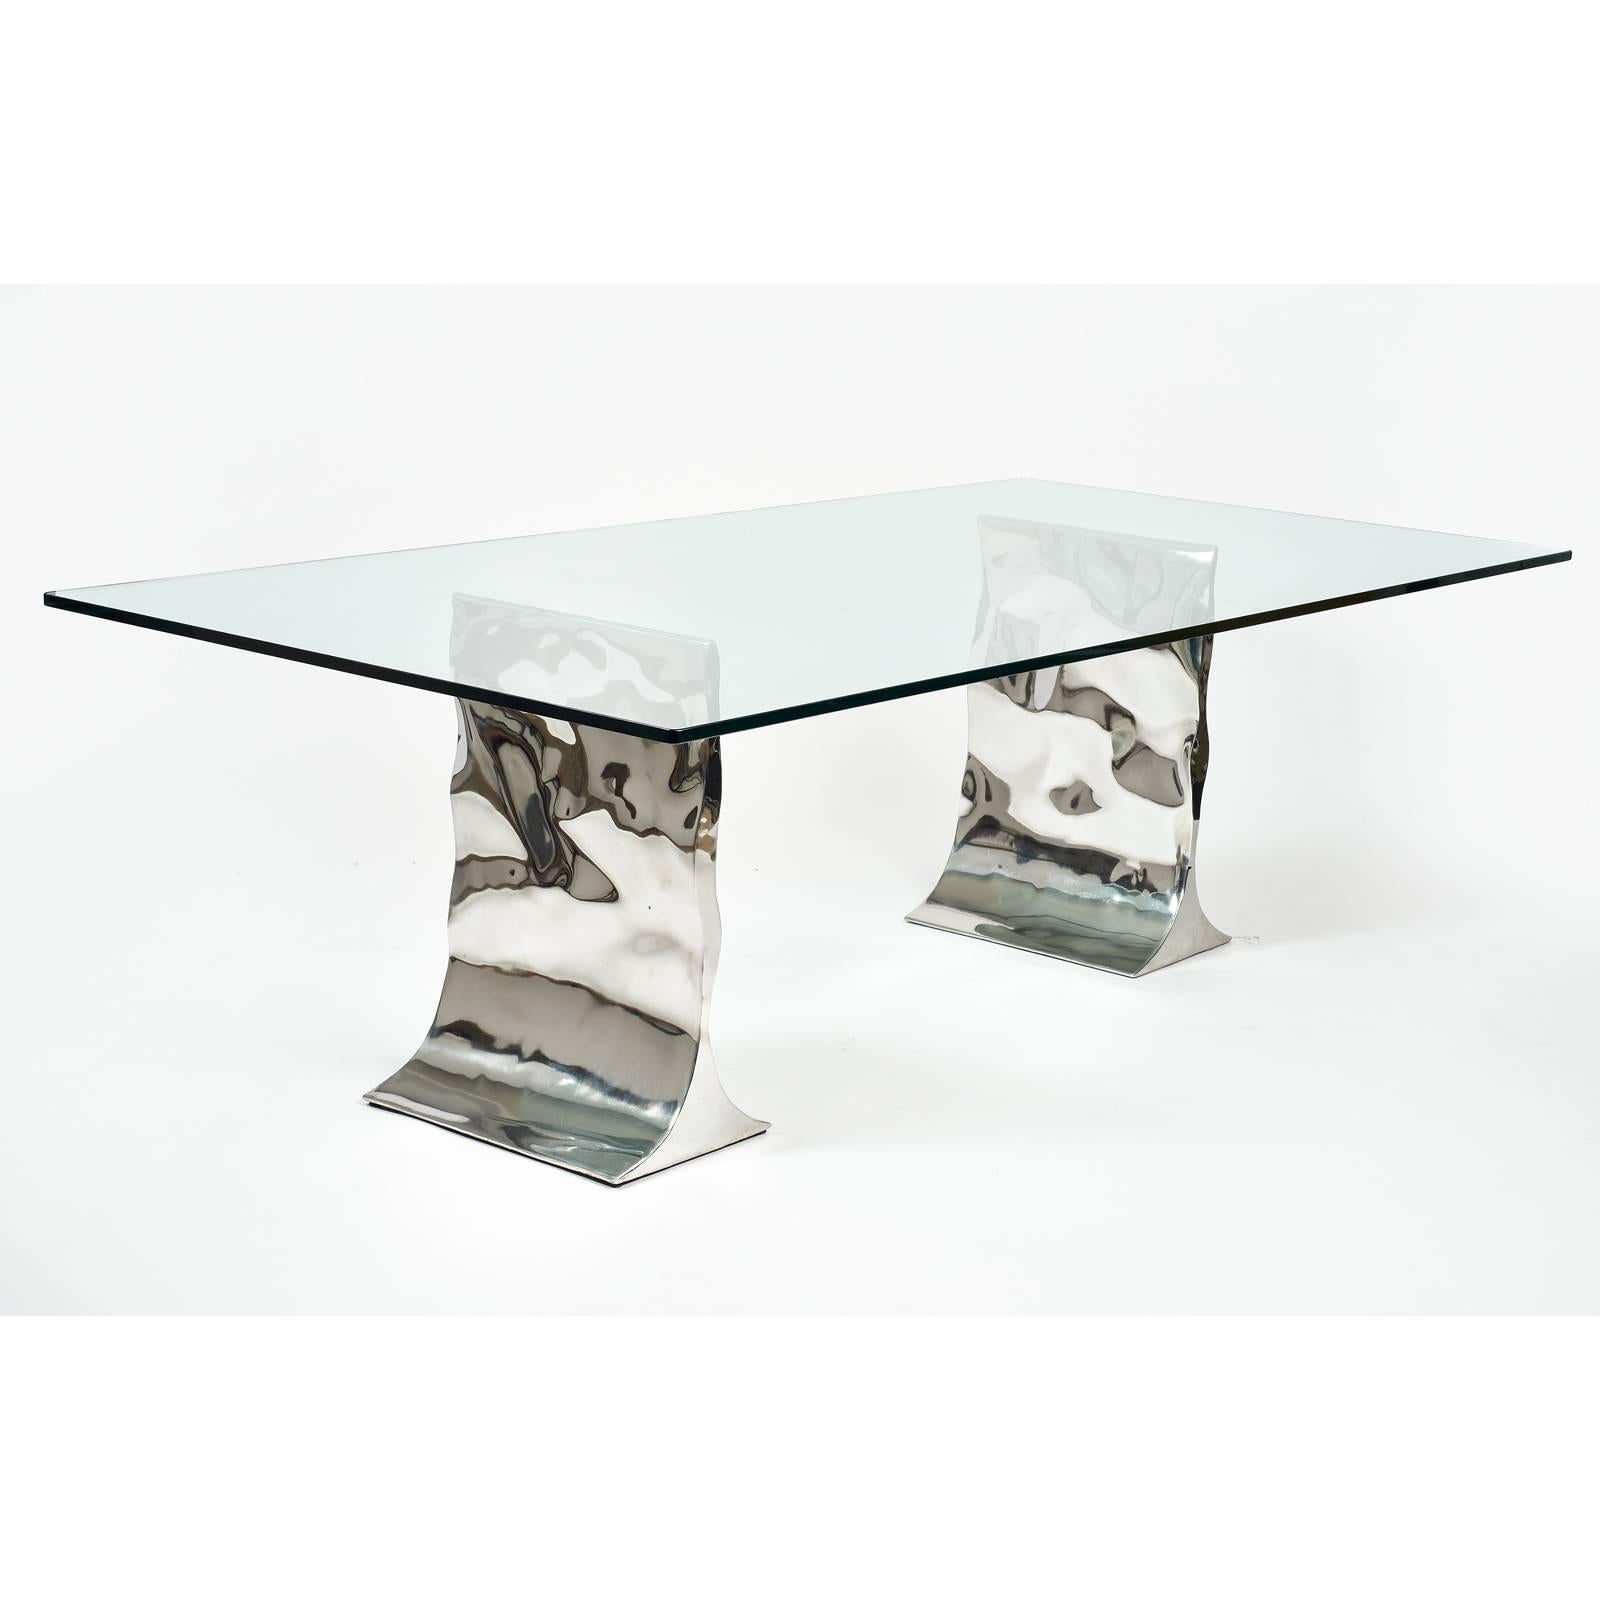 Chrome Stunning Polished Metal Silas Seandel Dining Table Signed, circa 1983